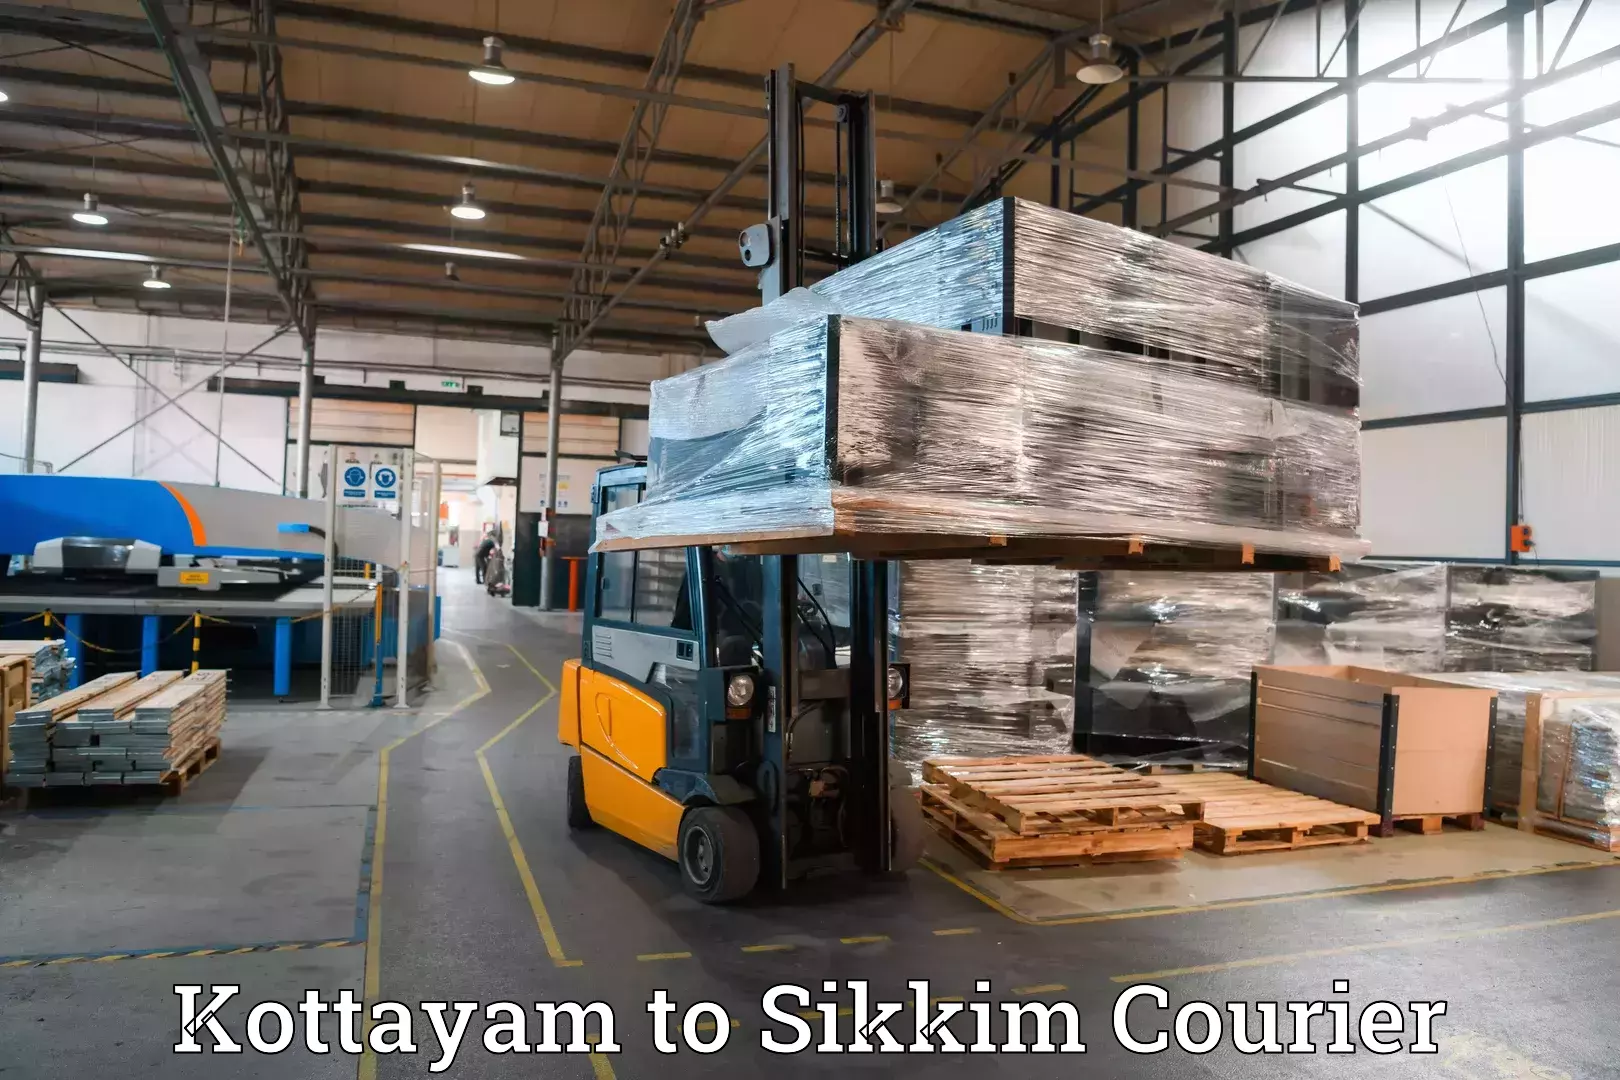 Baggage transport network Kottayam to South Sikkim